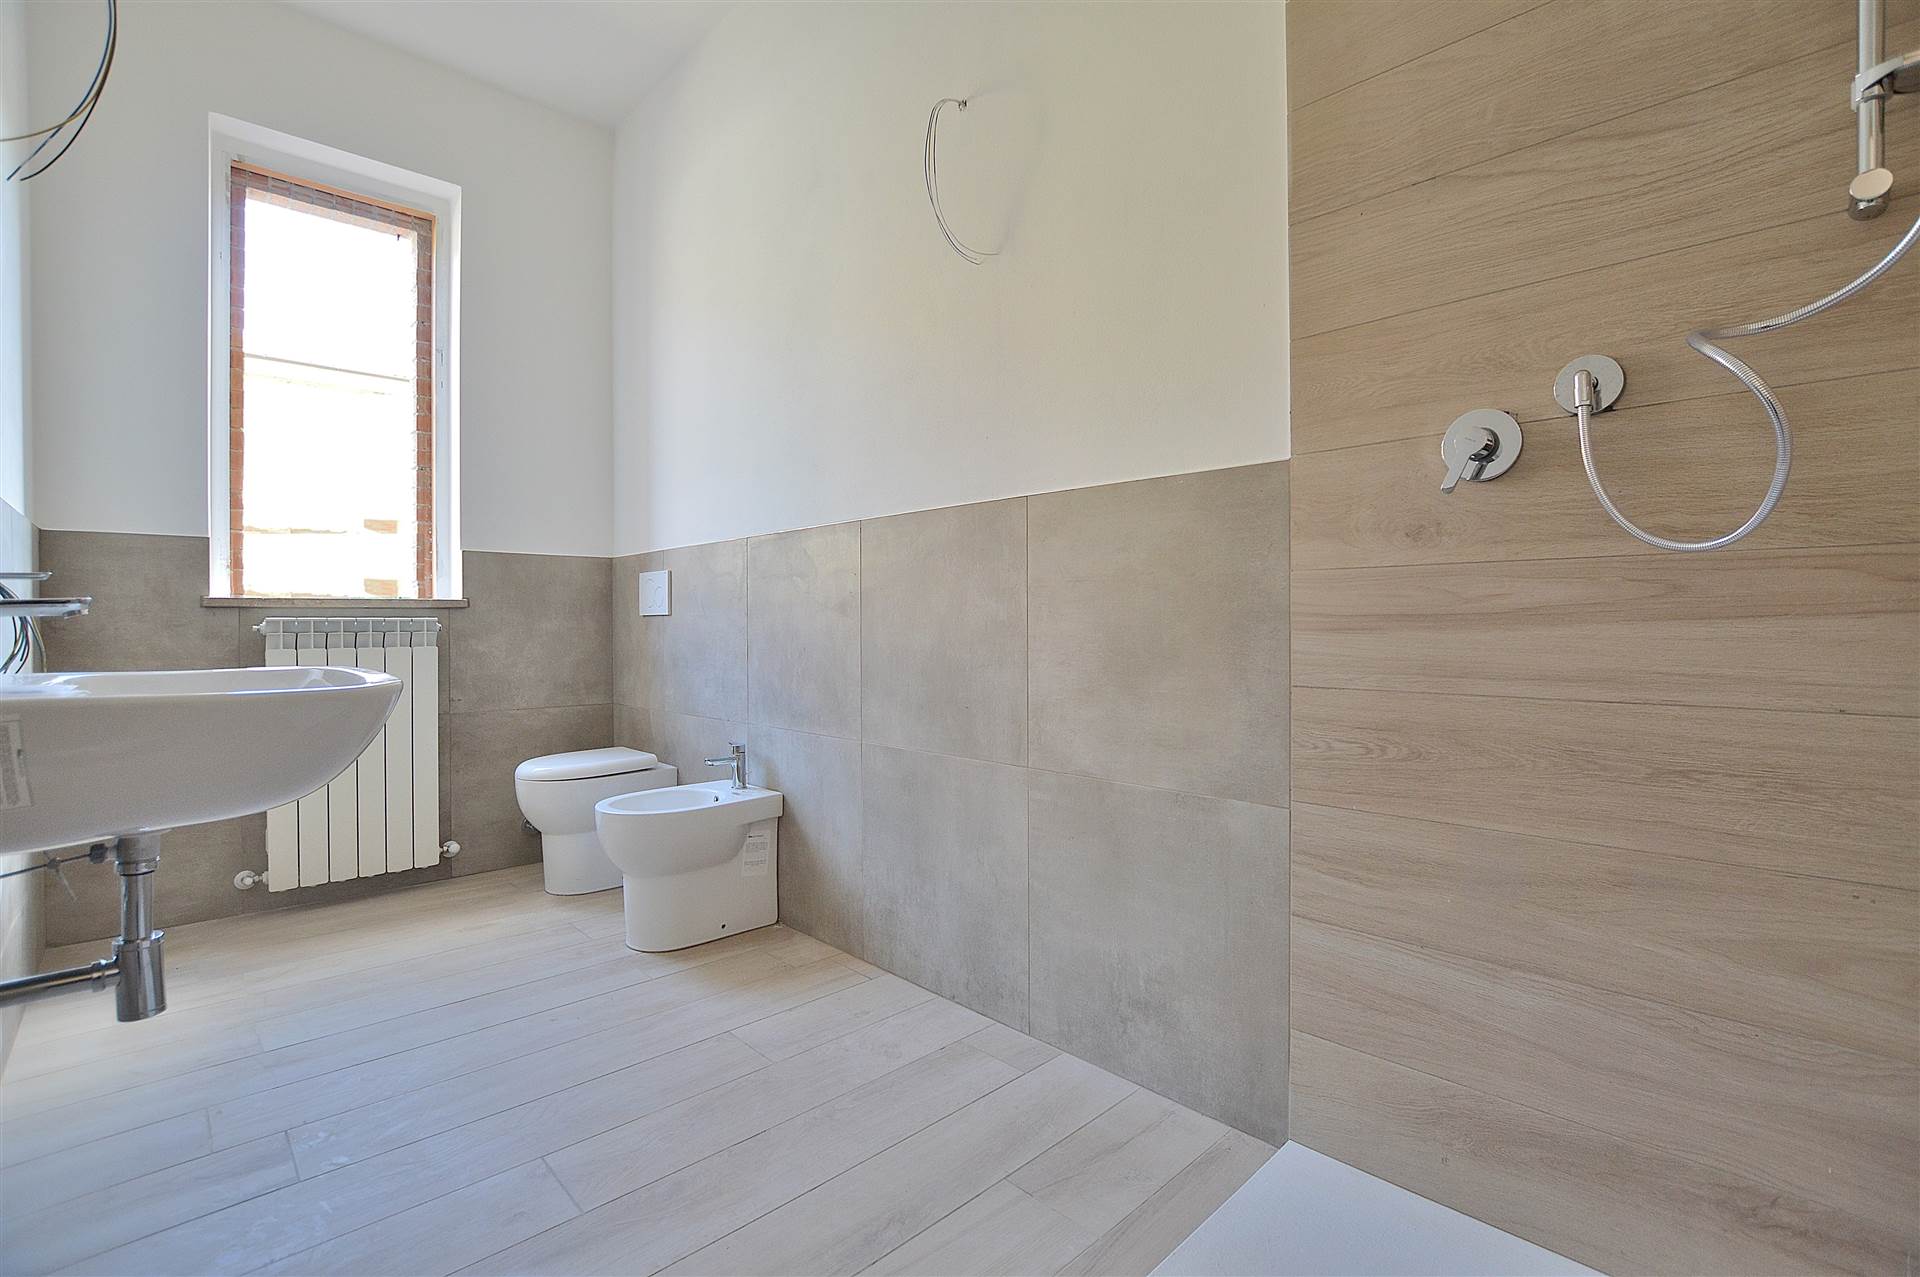 DUE PONTI, SIENA, Apartment for sale of 120 Sq. mt., New construction, Heating Individual heating system, Energetic class: C, Epi: 50 kwh/m2 year, 